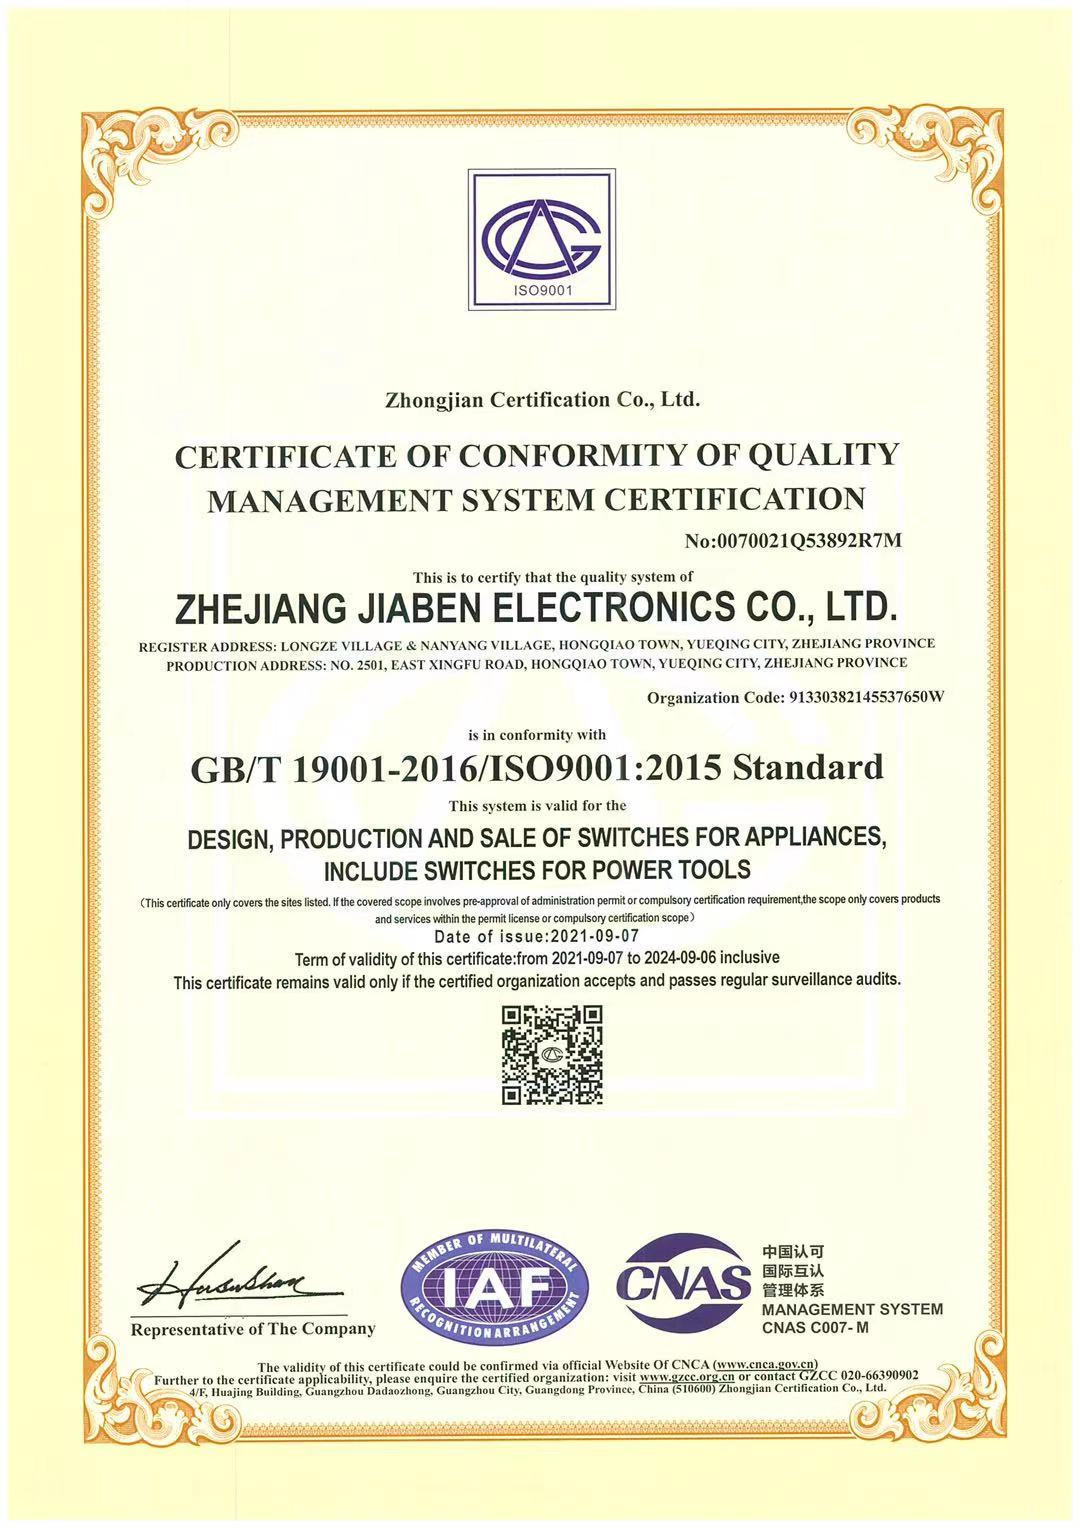 iso9001：2015 quality managements systerm certification-jiaben-2021.09.07